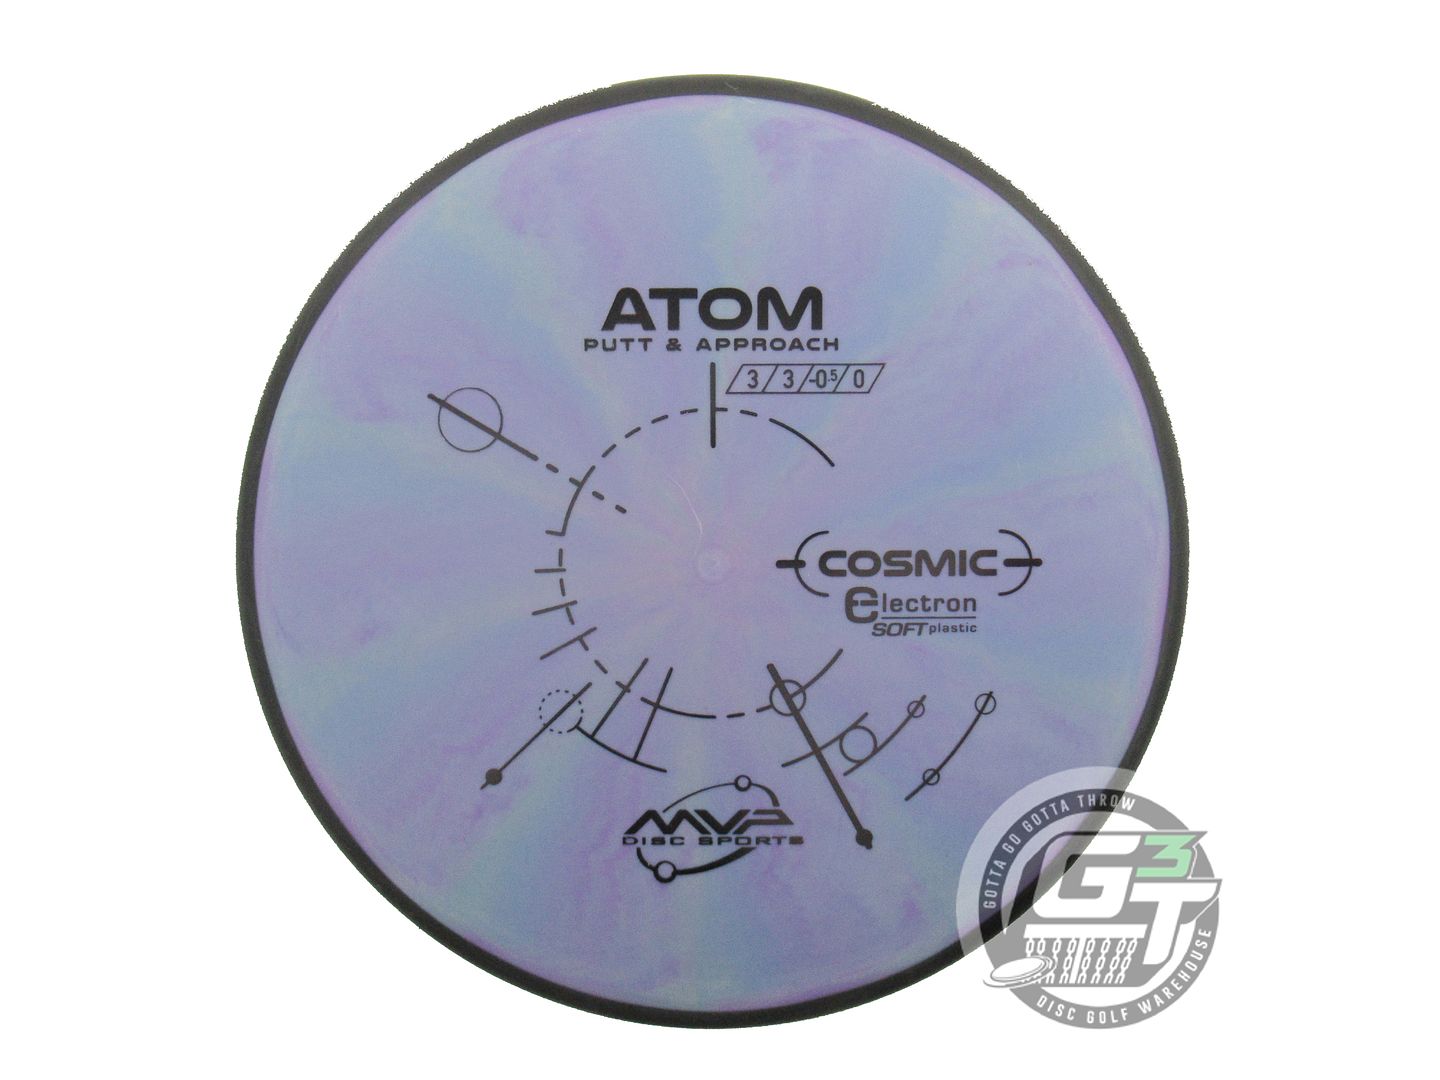 MVP Cosmic Electron Soft Atom Putter Golf Disc (Individually Listed)